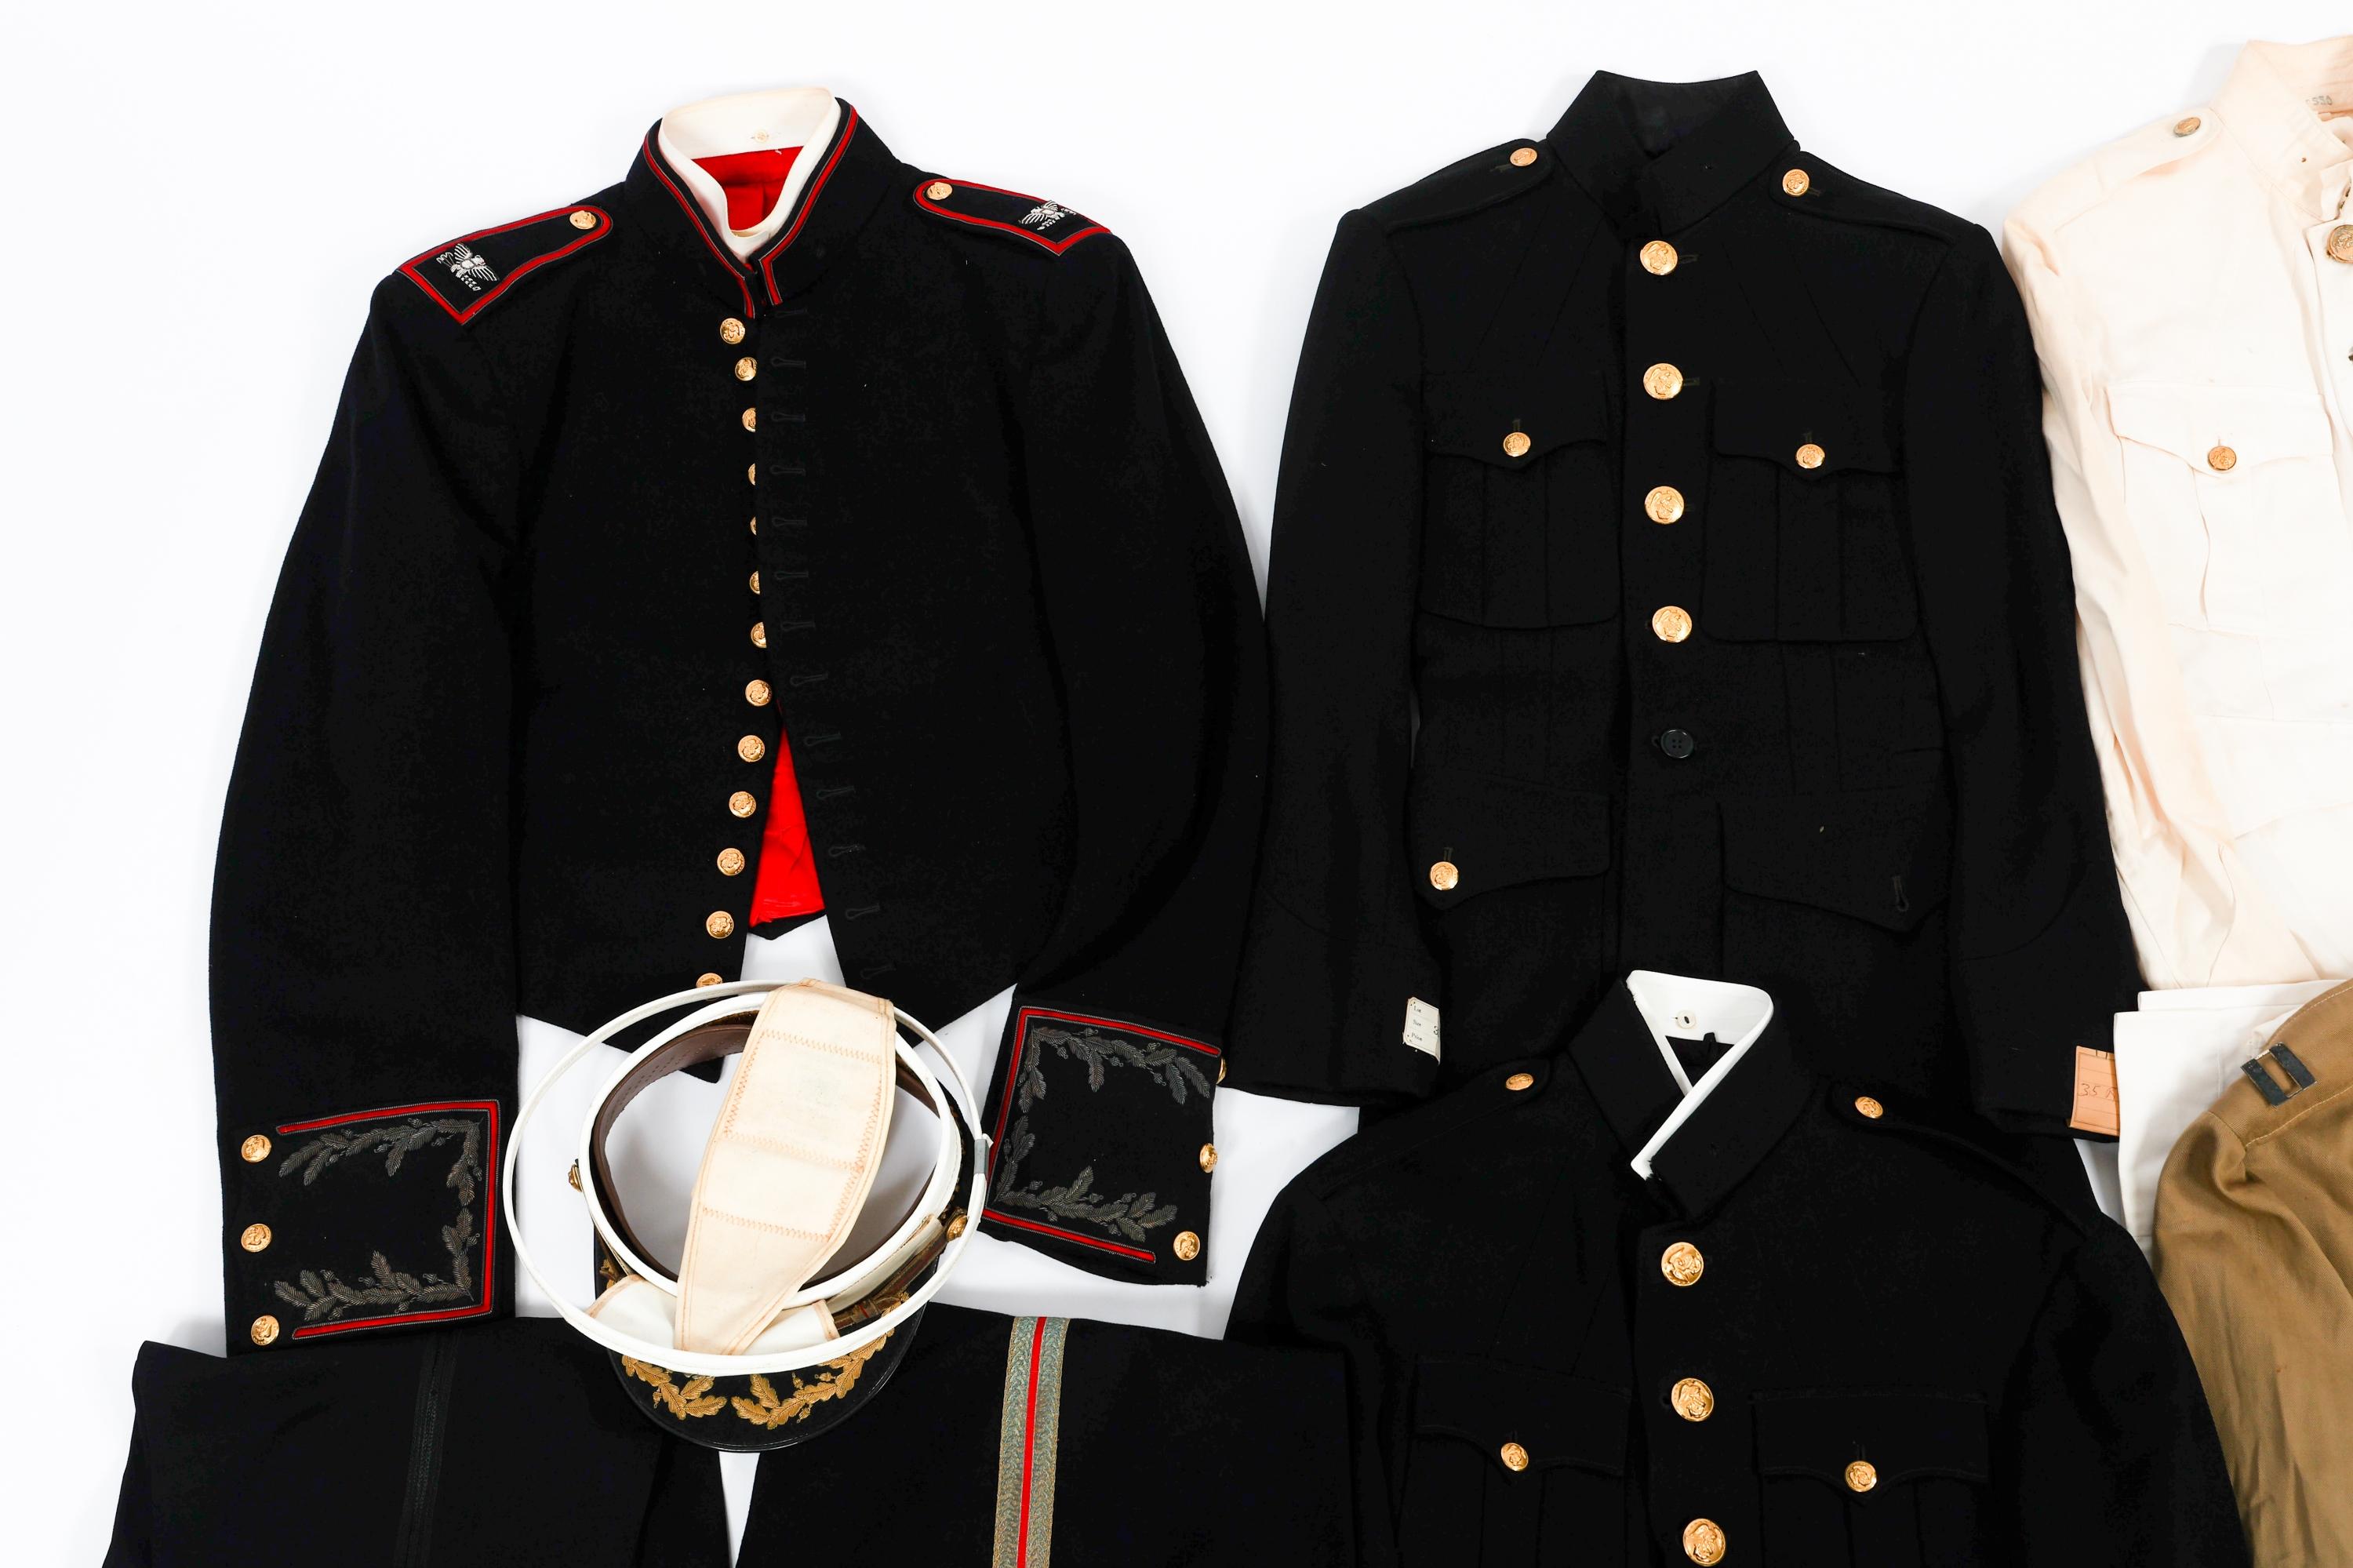 WWII - COLD WAR US MARINE CORPS OFFICER UNIFORMS